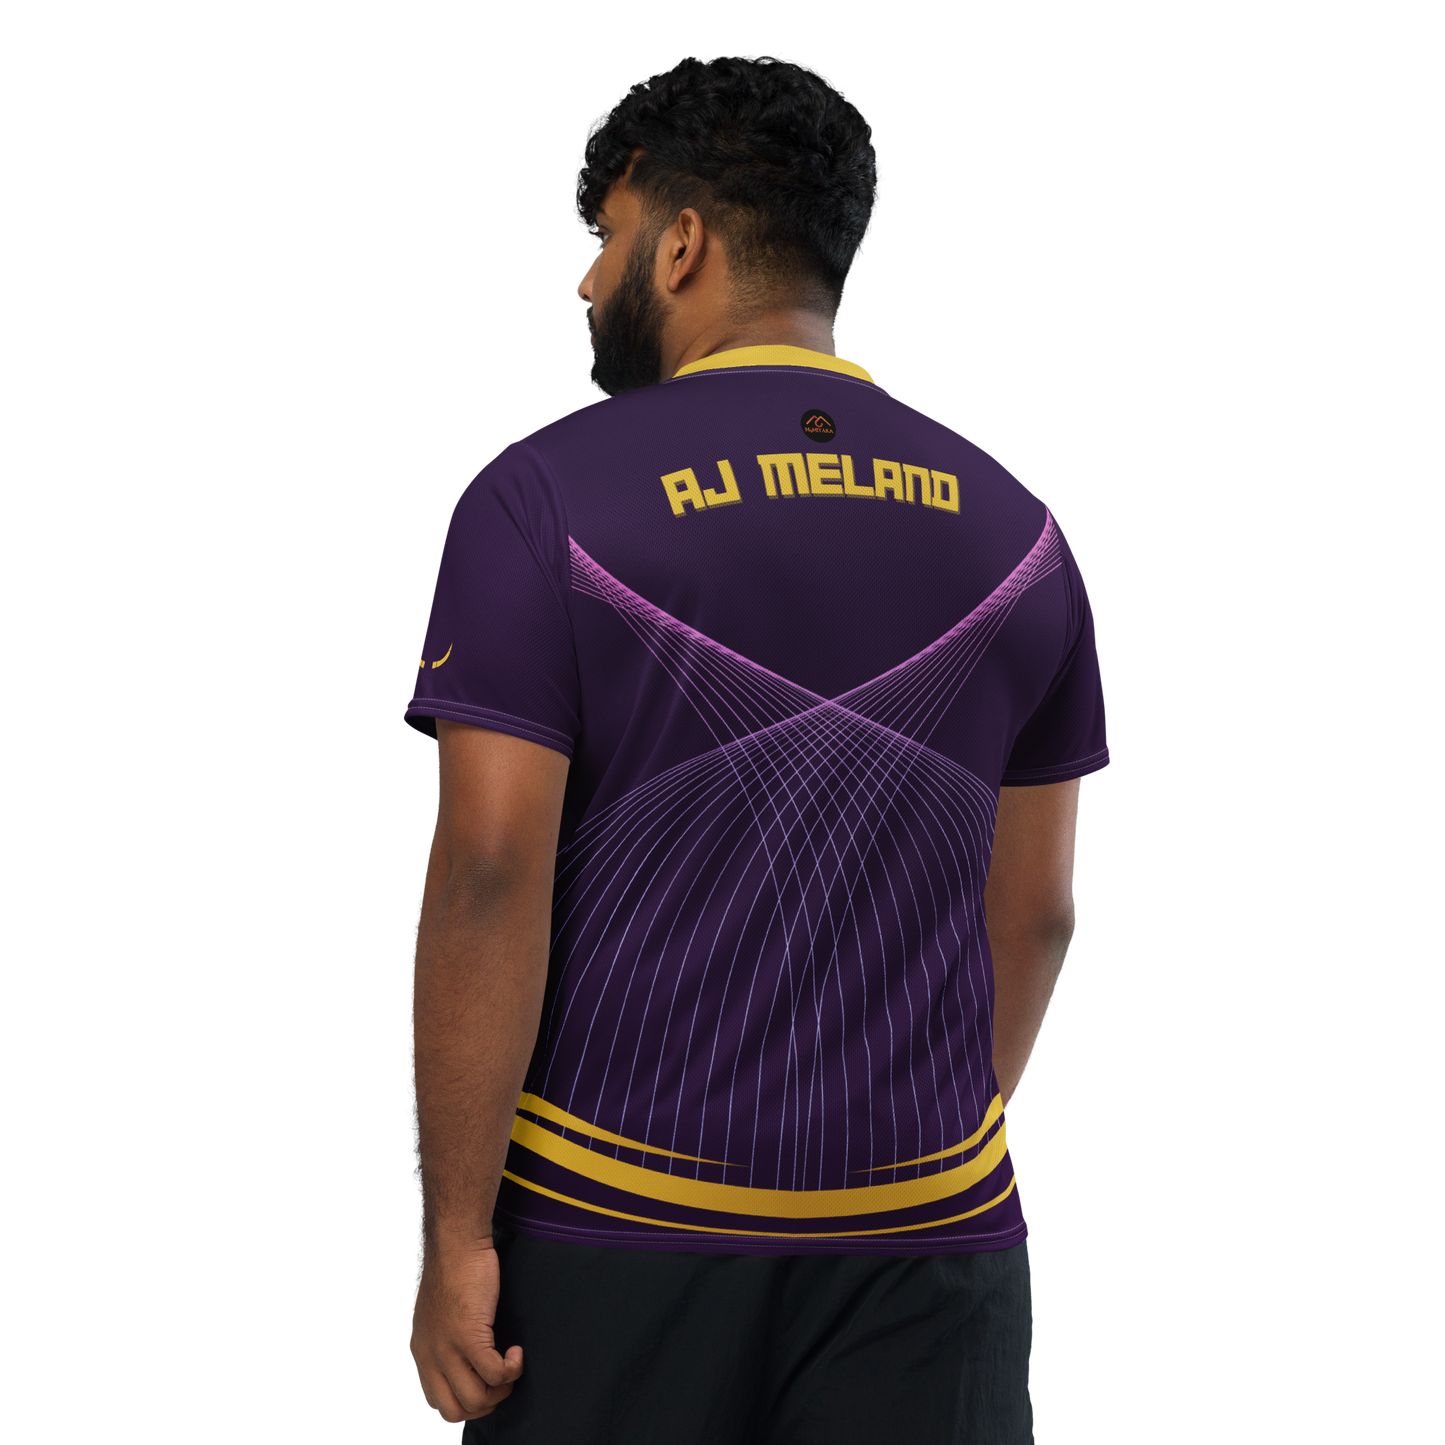 Recycled unisex sports jersey